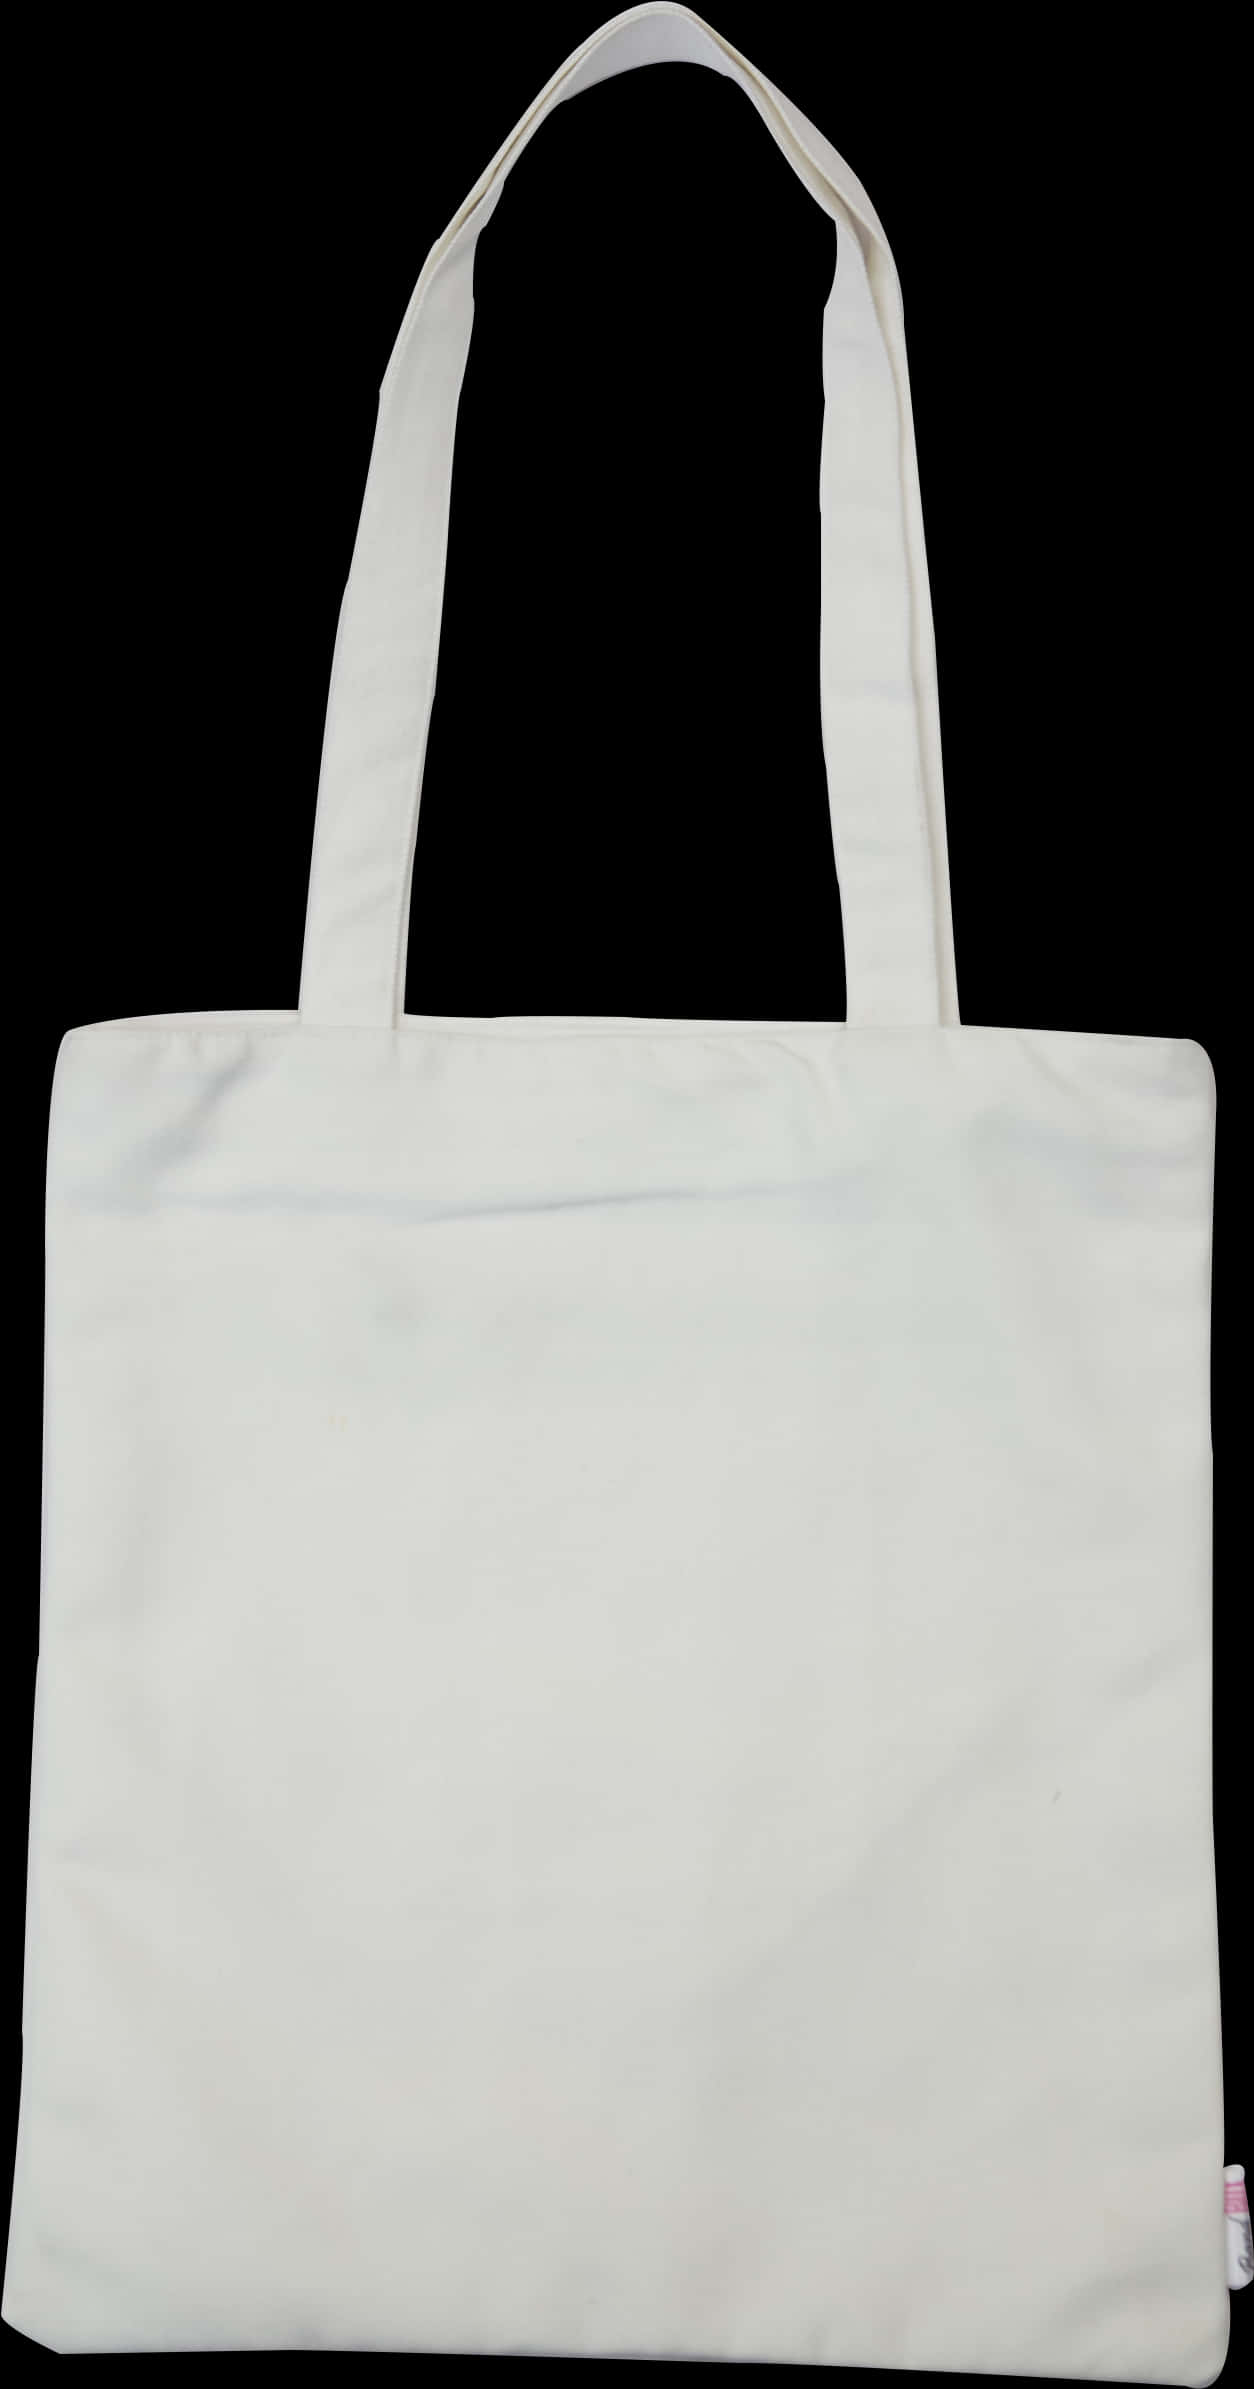 A White Bag With Straps